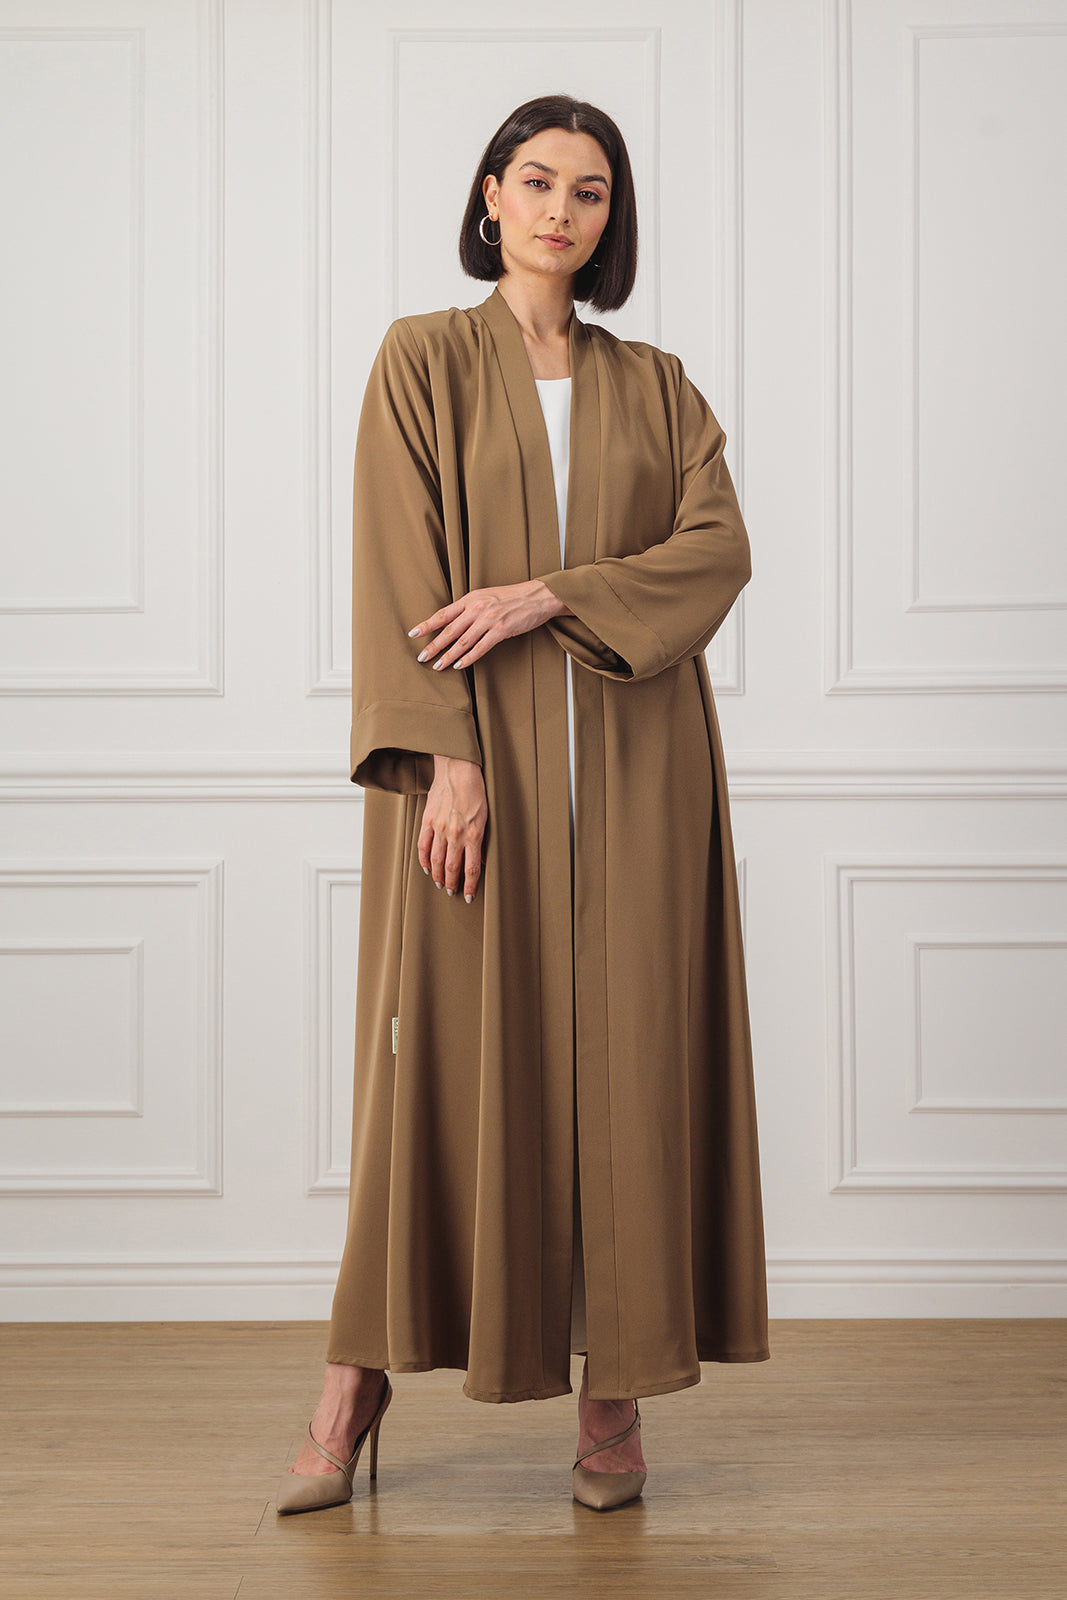 Classic Abaya designed with overlapped detail